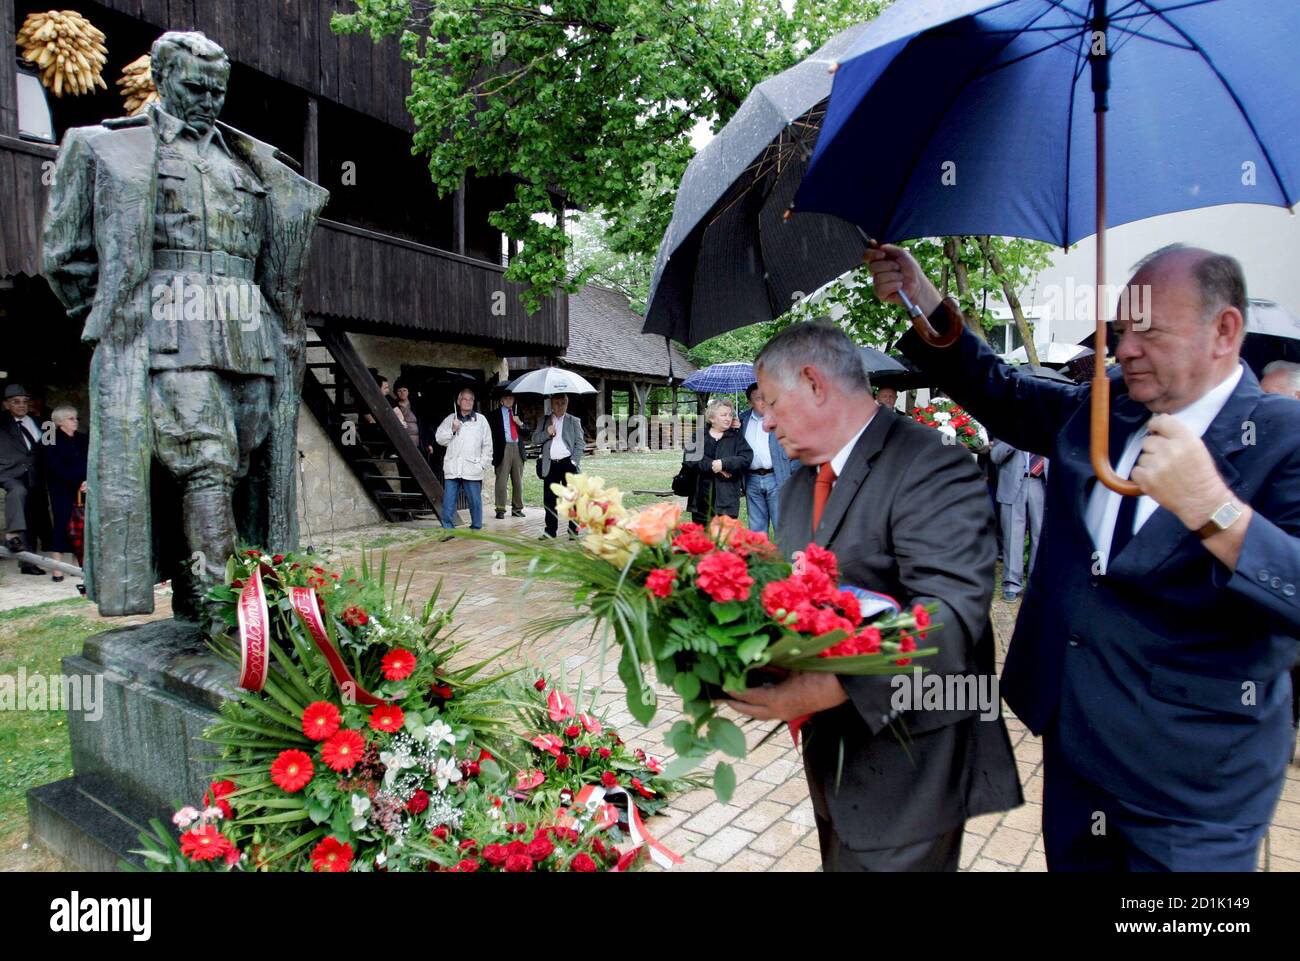 Men place flowers at the statue of Yugoslav wartime partisan leader Josip  Broz Tito at Tito's birthplace in the Croatian village of Kumrovec on the  anniversary of his death May 4, 2007.